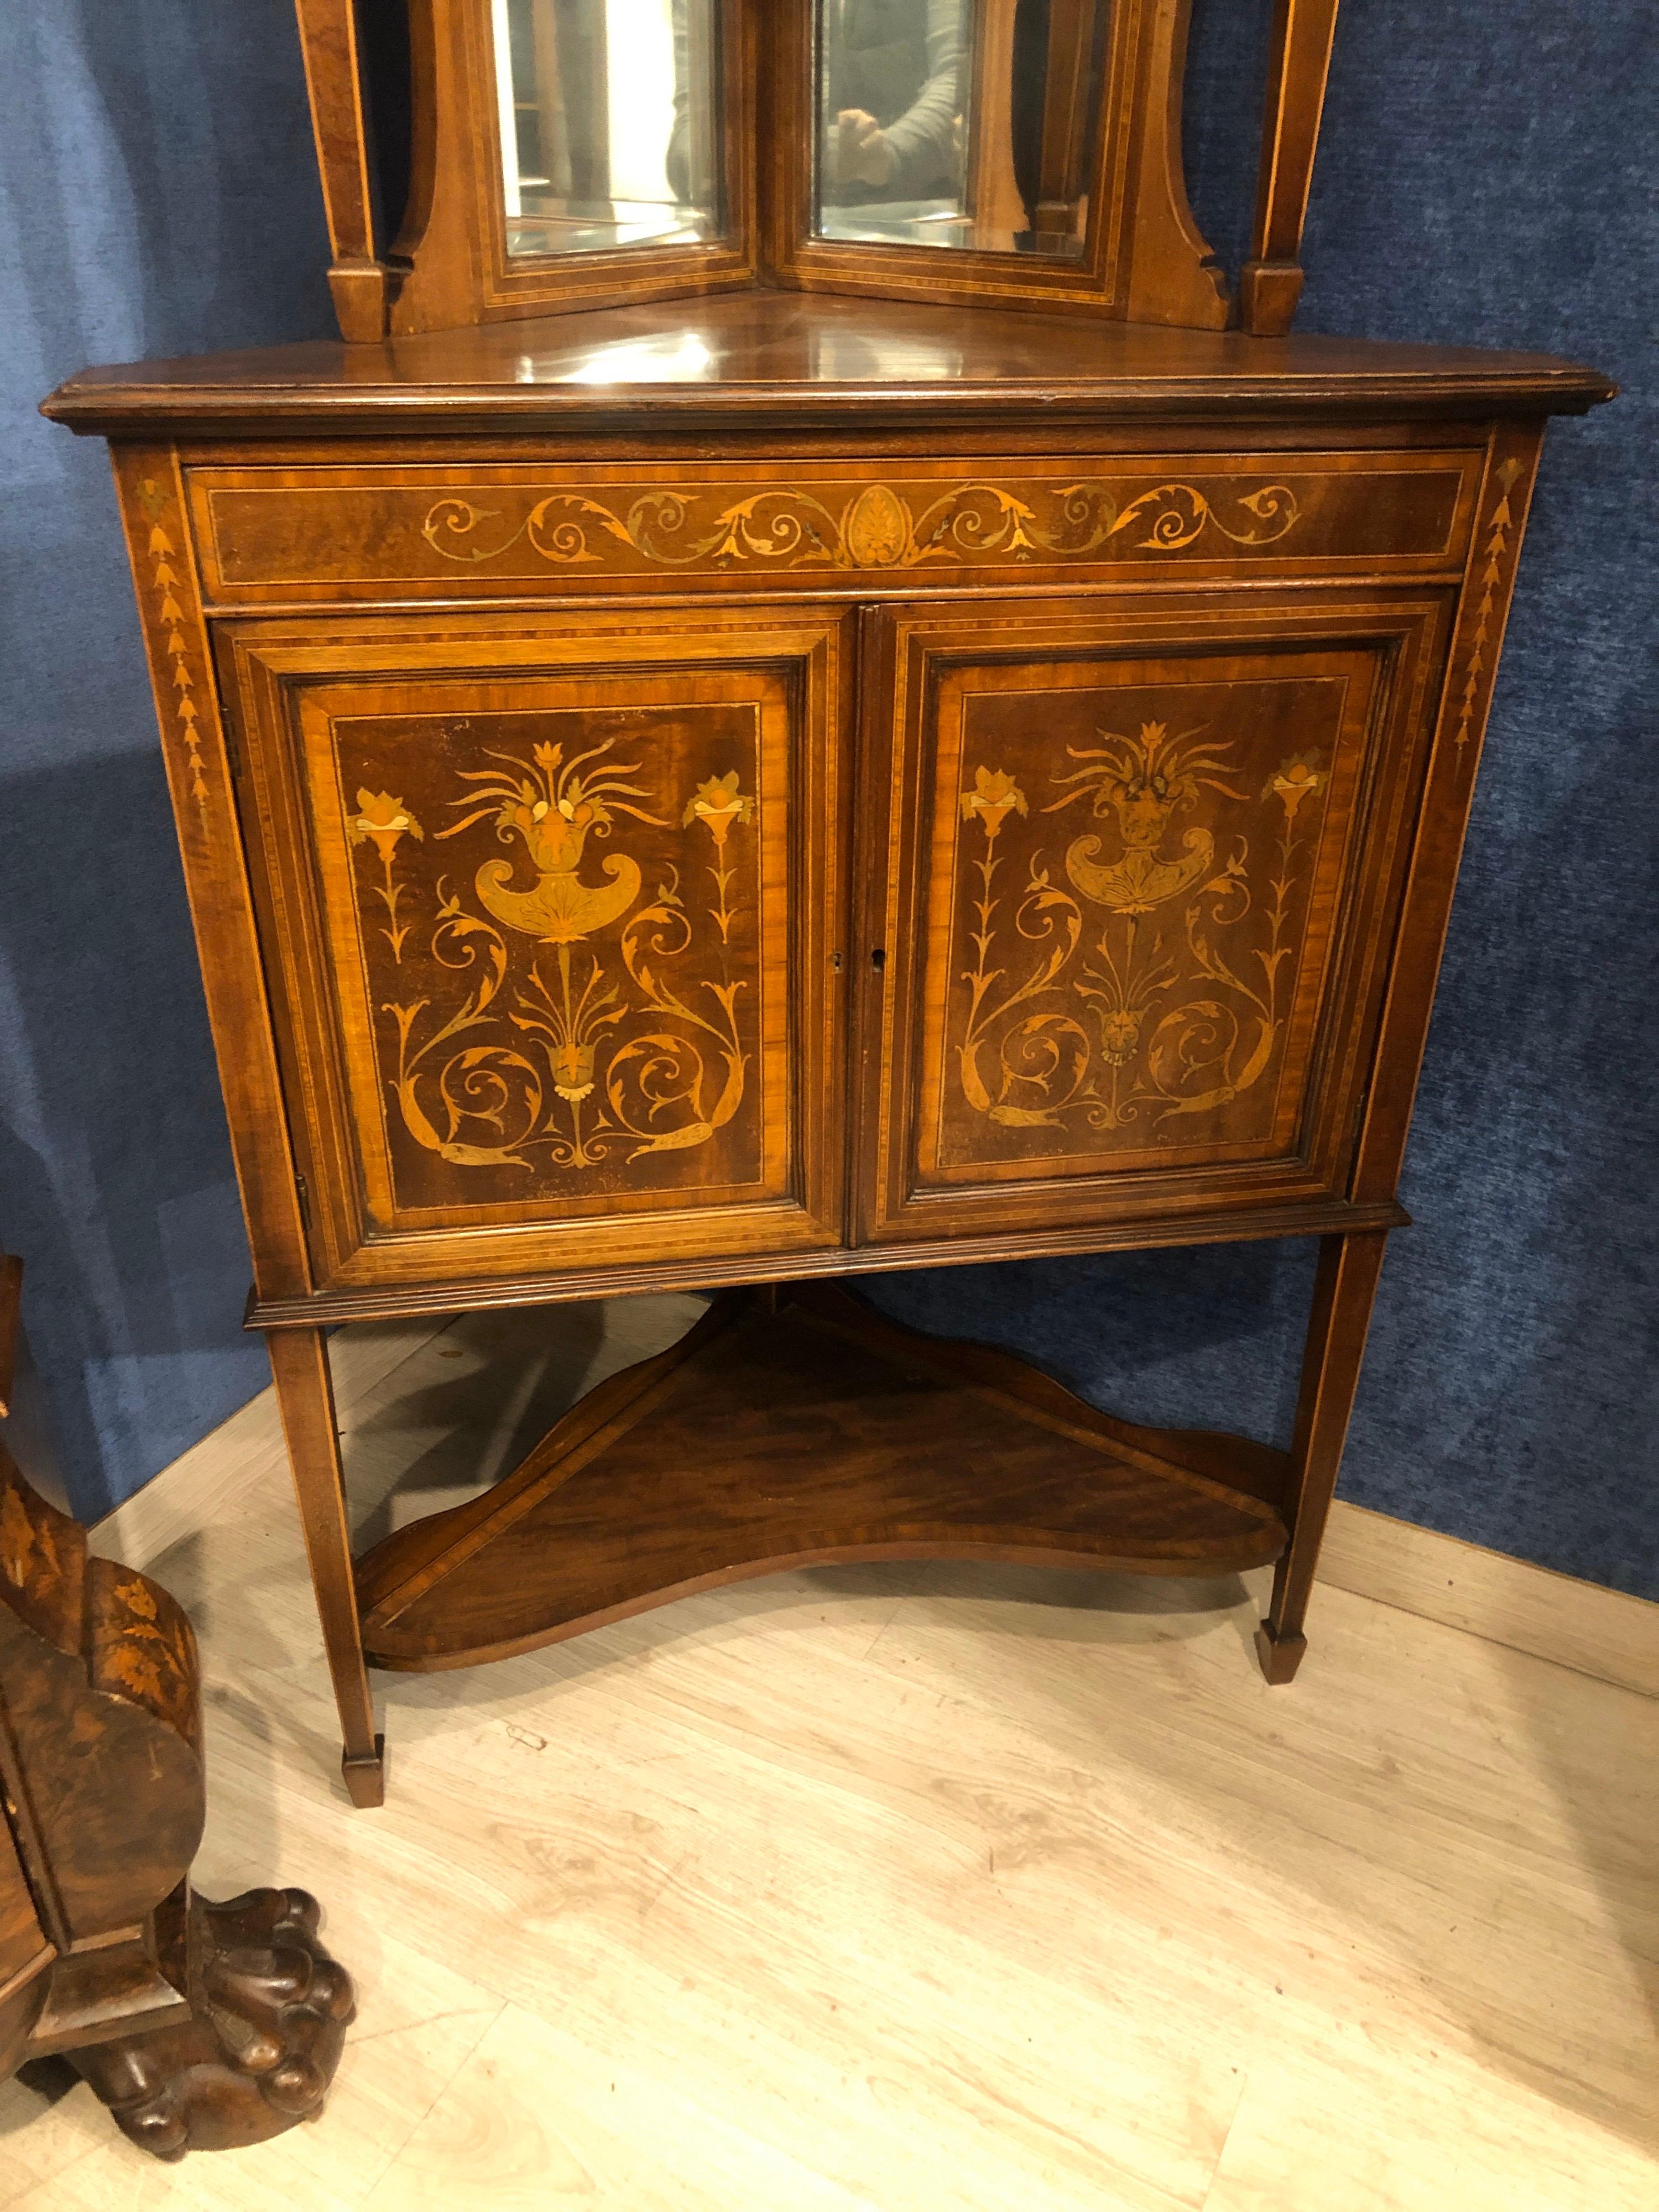 An Edwardian Sheraton Revival corner cabinet, mahogany, fruitwood and satinwood inlay. Fine quality inlaid decoration, of excellent proportions and in excellent state of conservation.